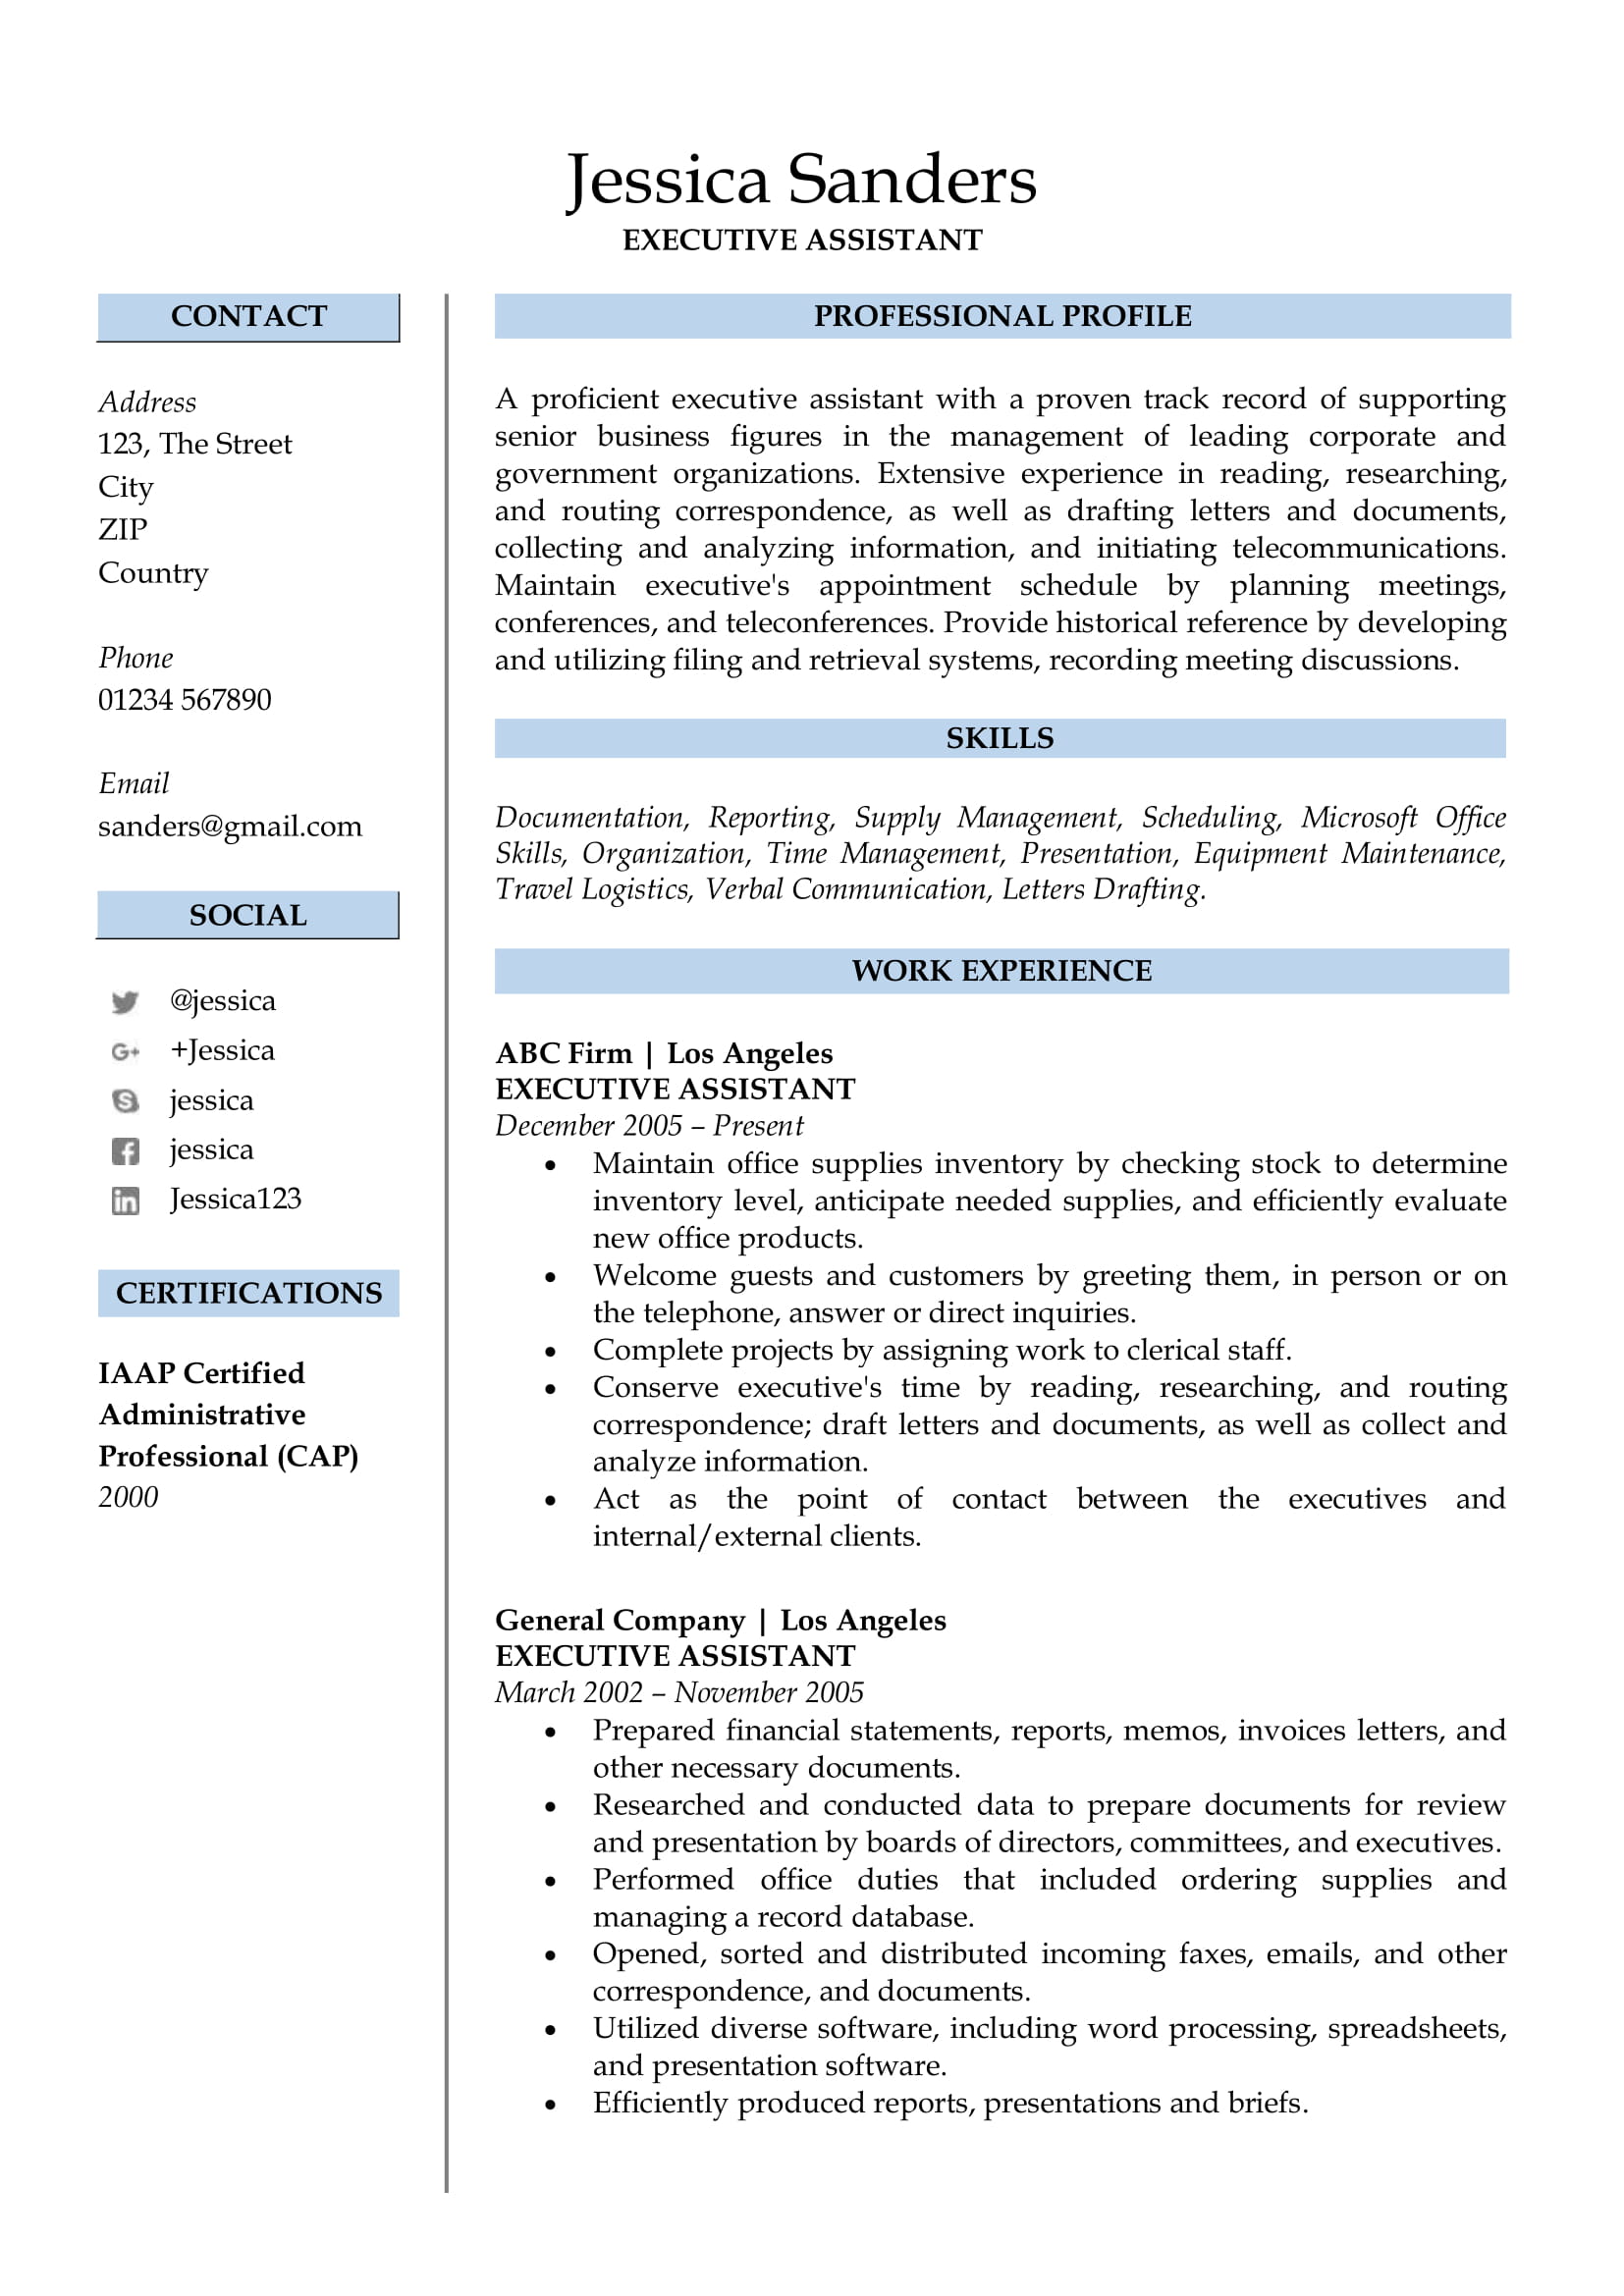 download free professional resume templates